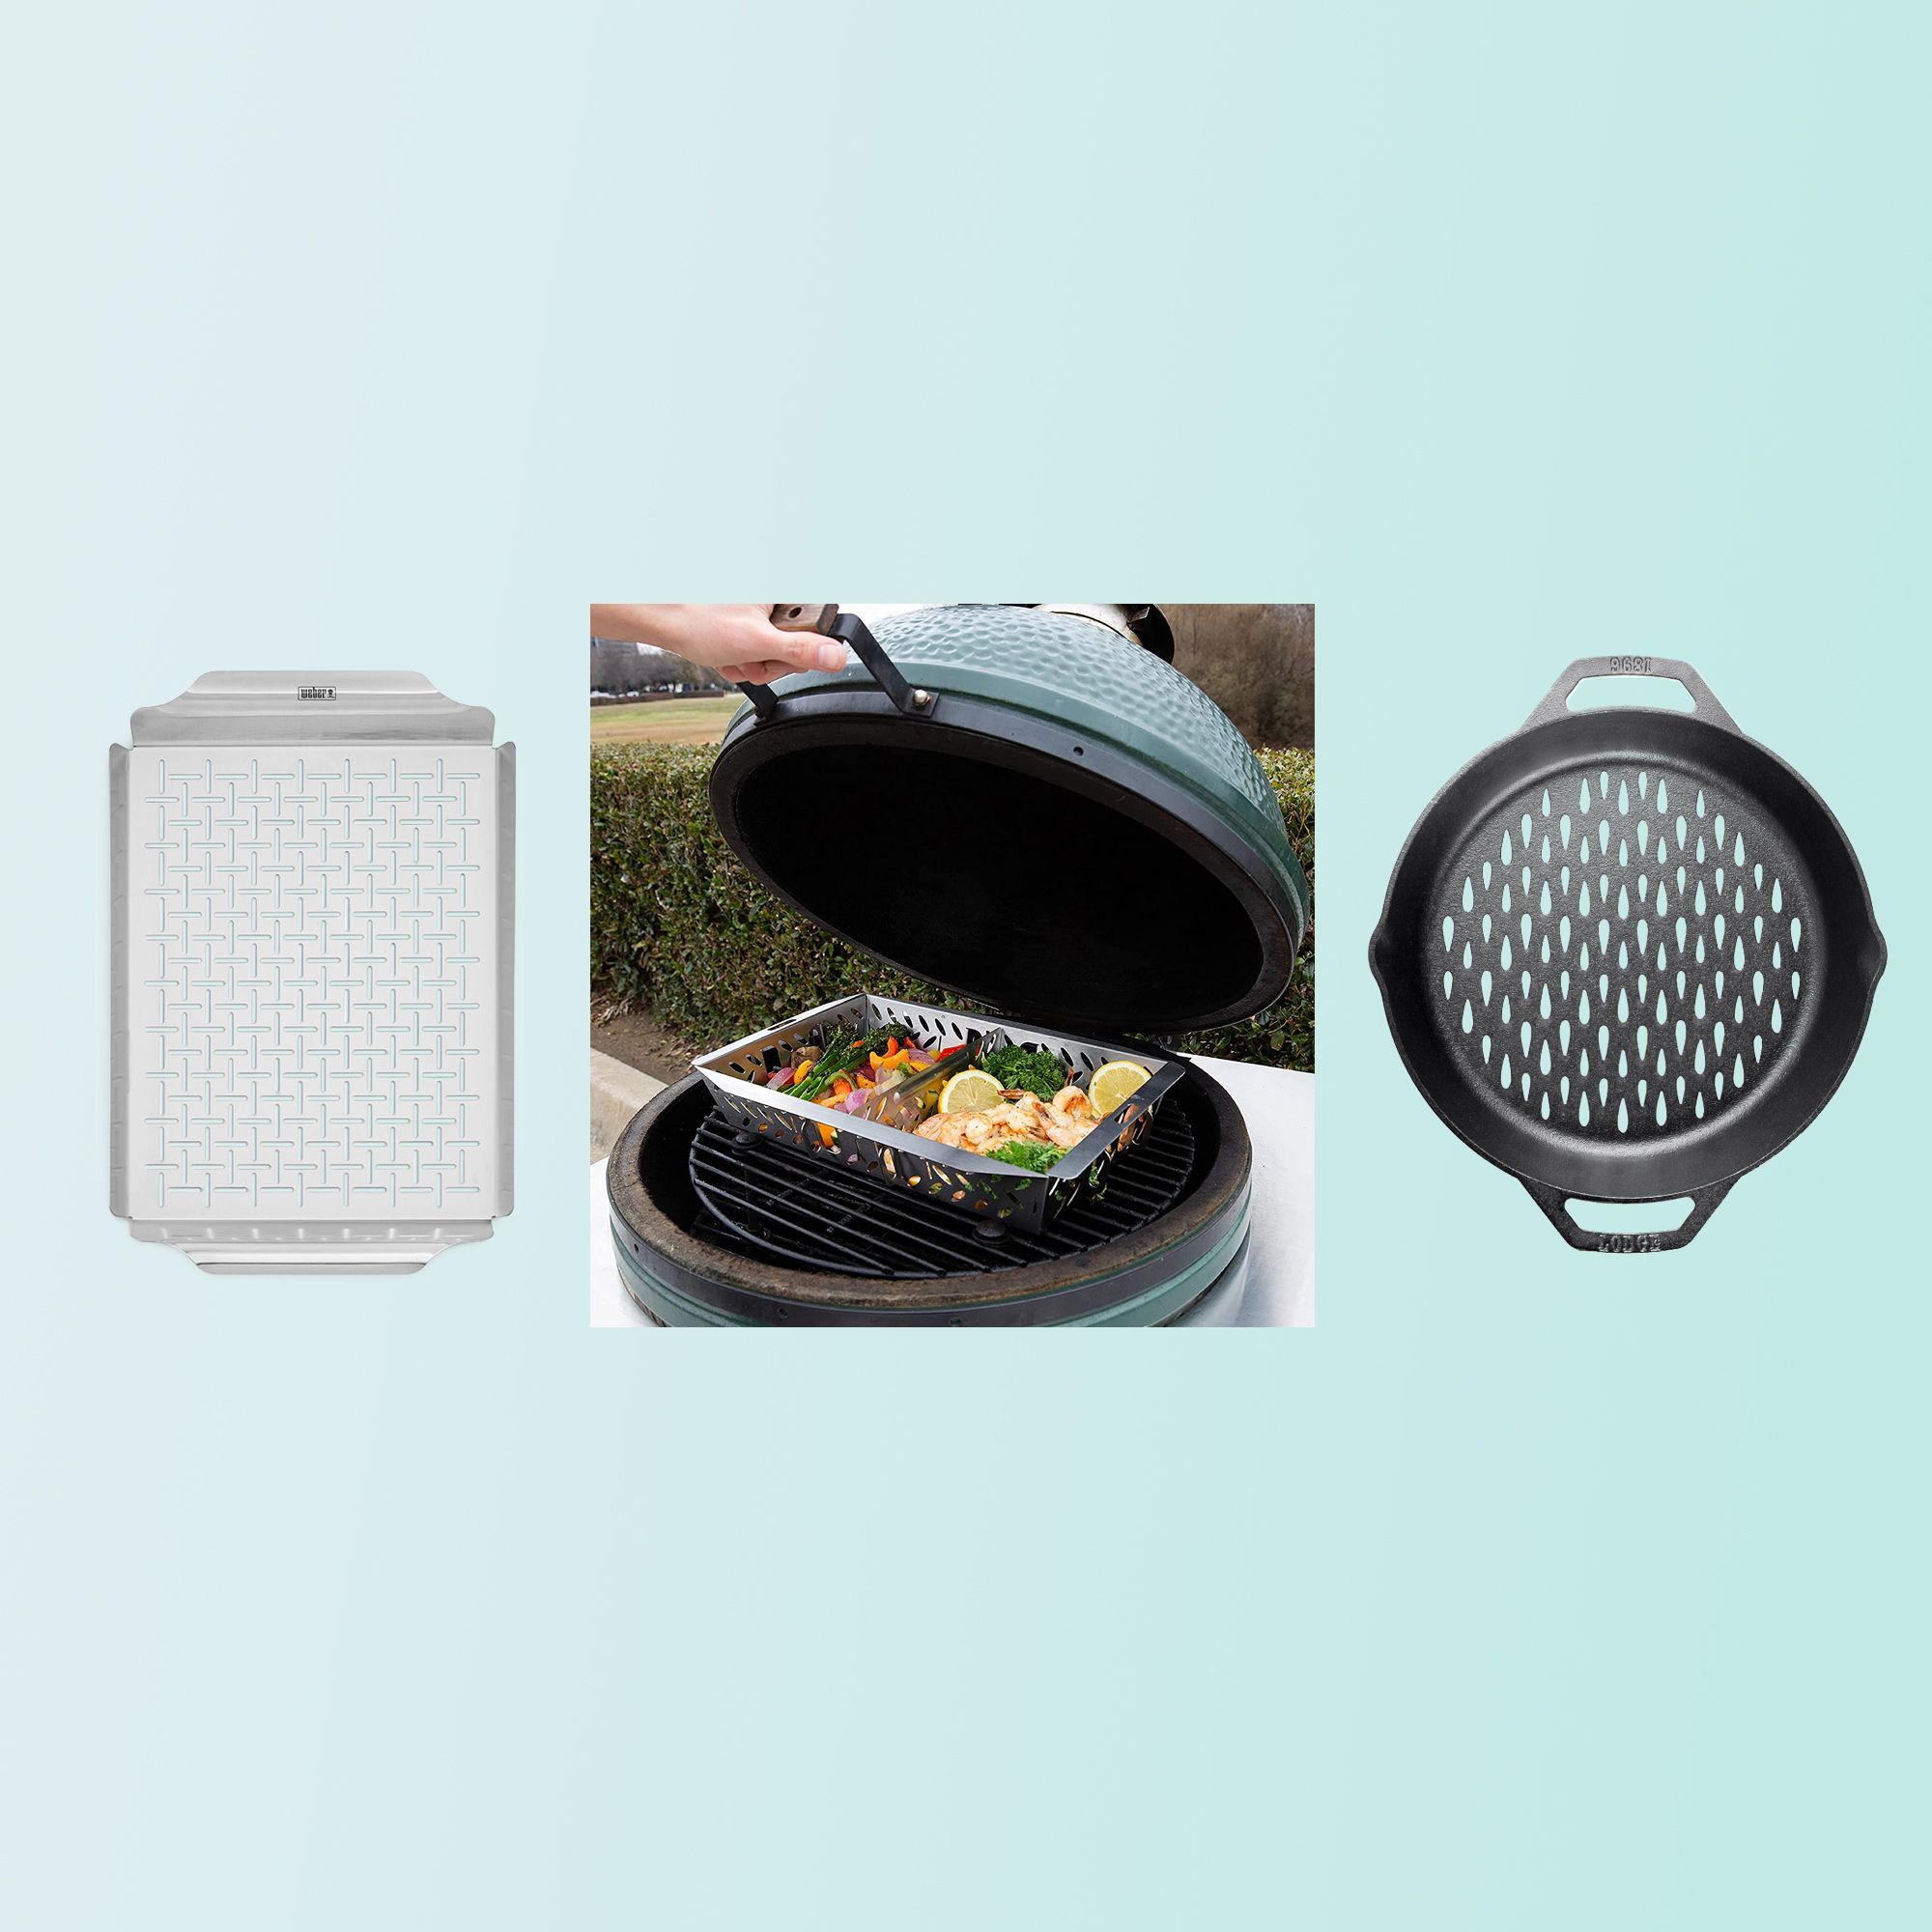 Large VSILE Portable BBQ Grill Basket Professional Barbecue Tool for Grilling Fish Vegetable Steak Meat Shrimp Made of Durable 430 Stainless Steel with Removable Handle 